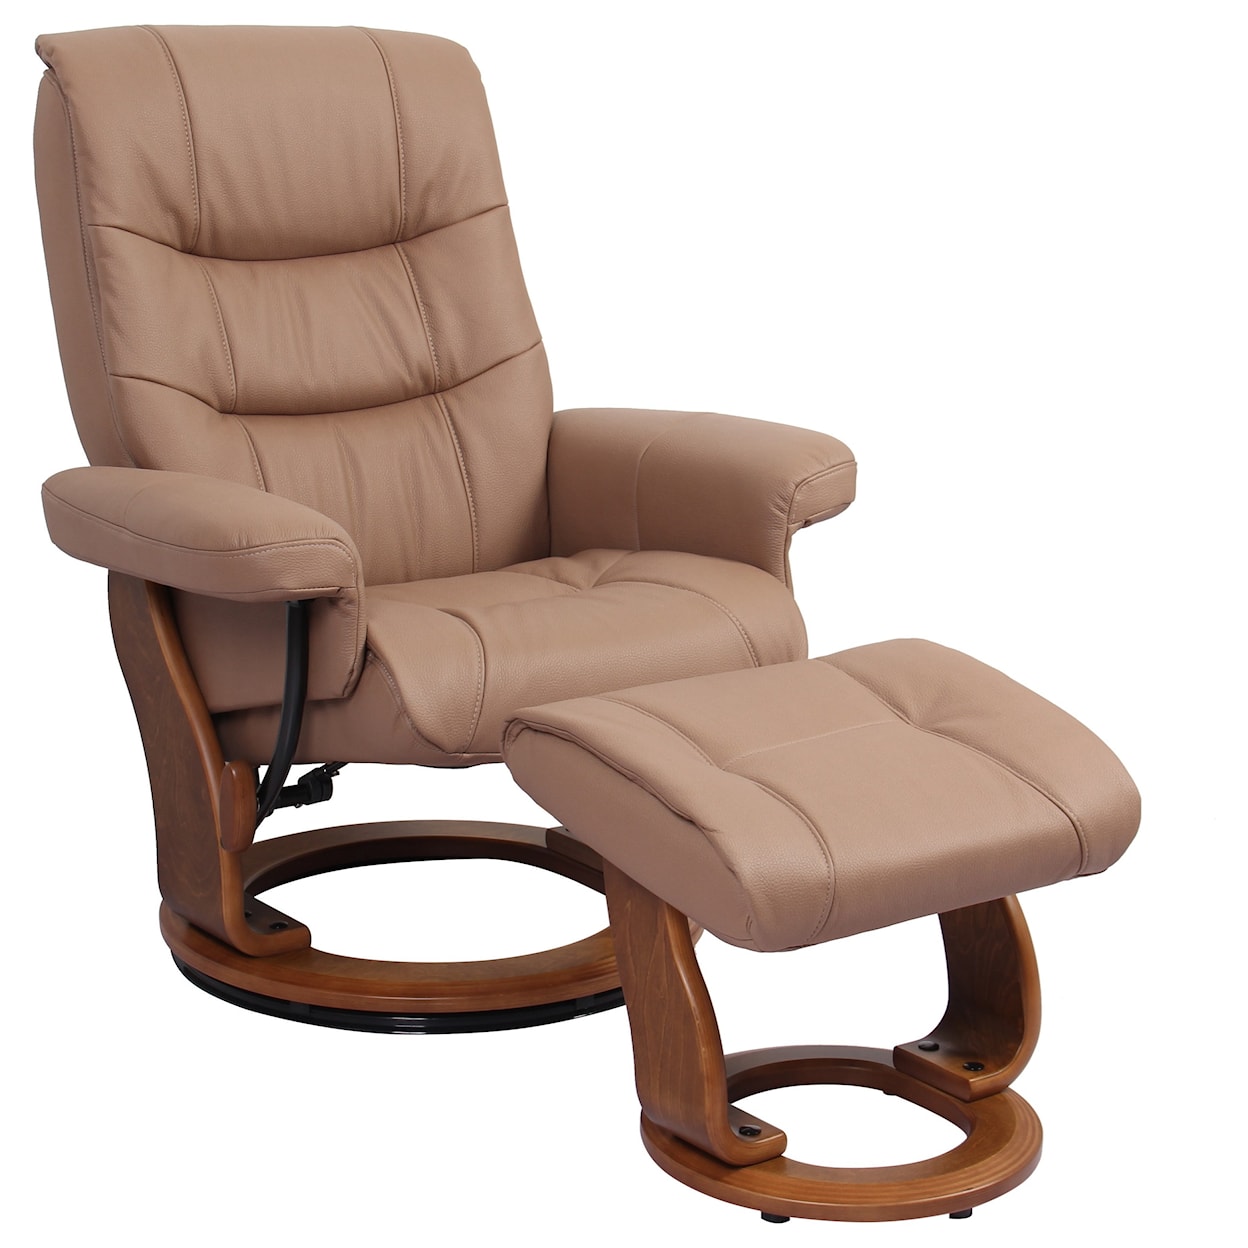 Benchmaster Rosa II Reclining Chair and Ottoman